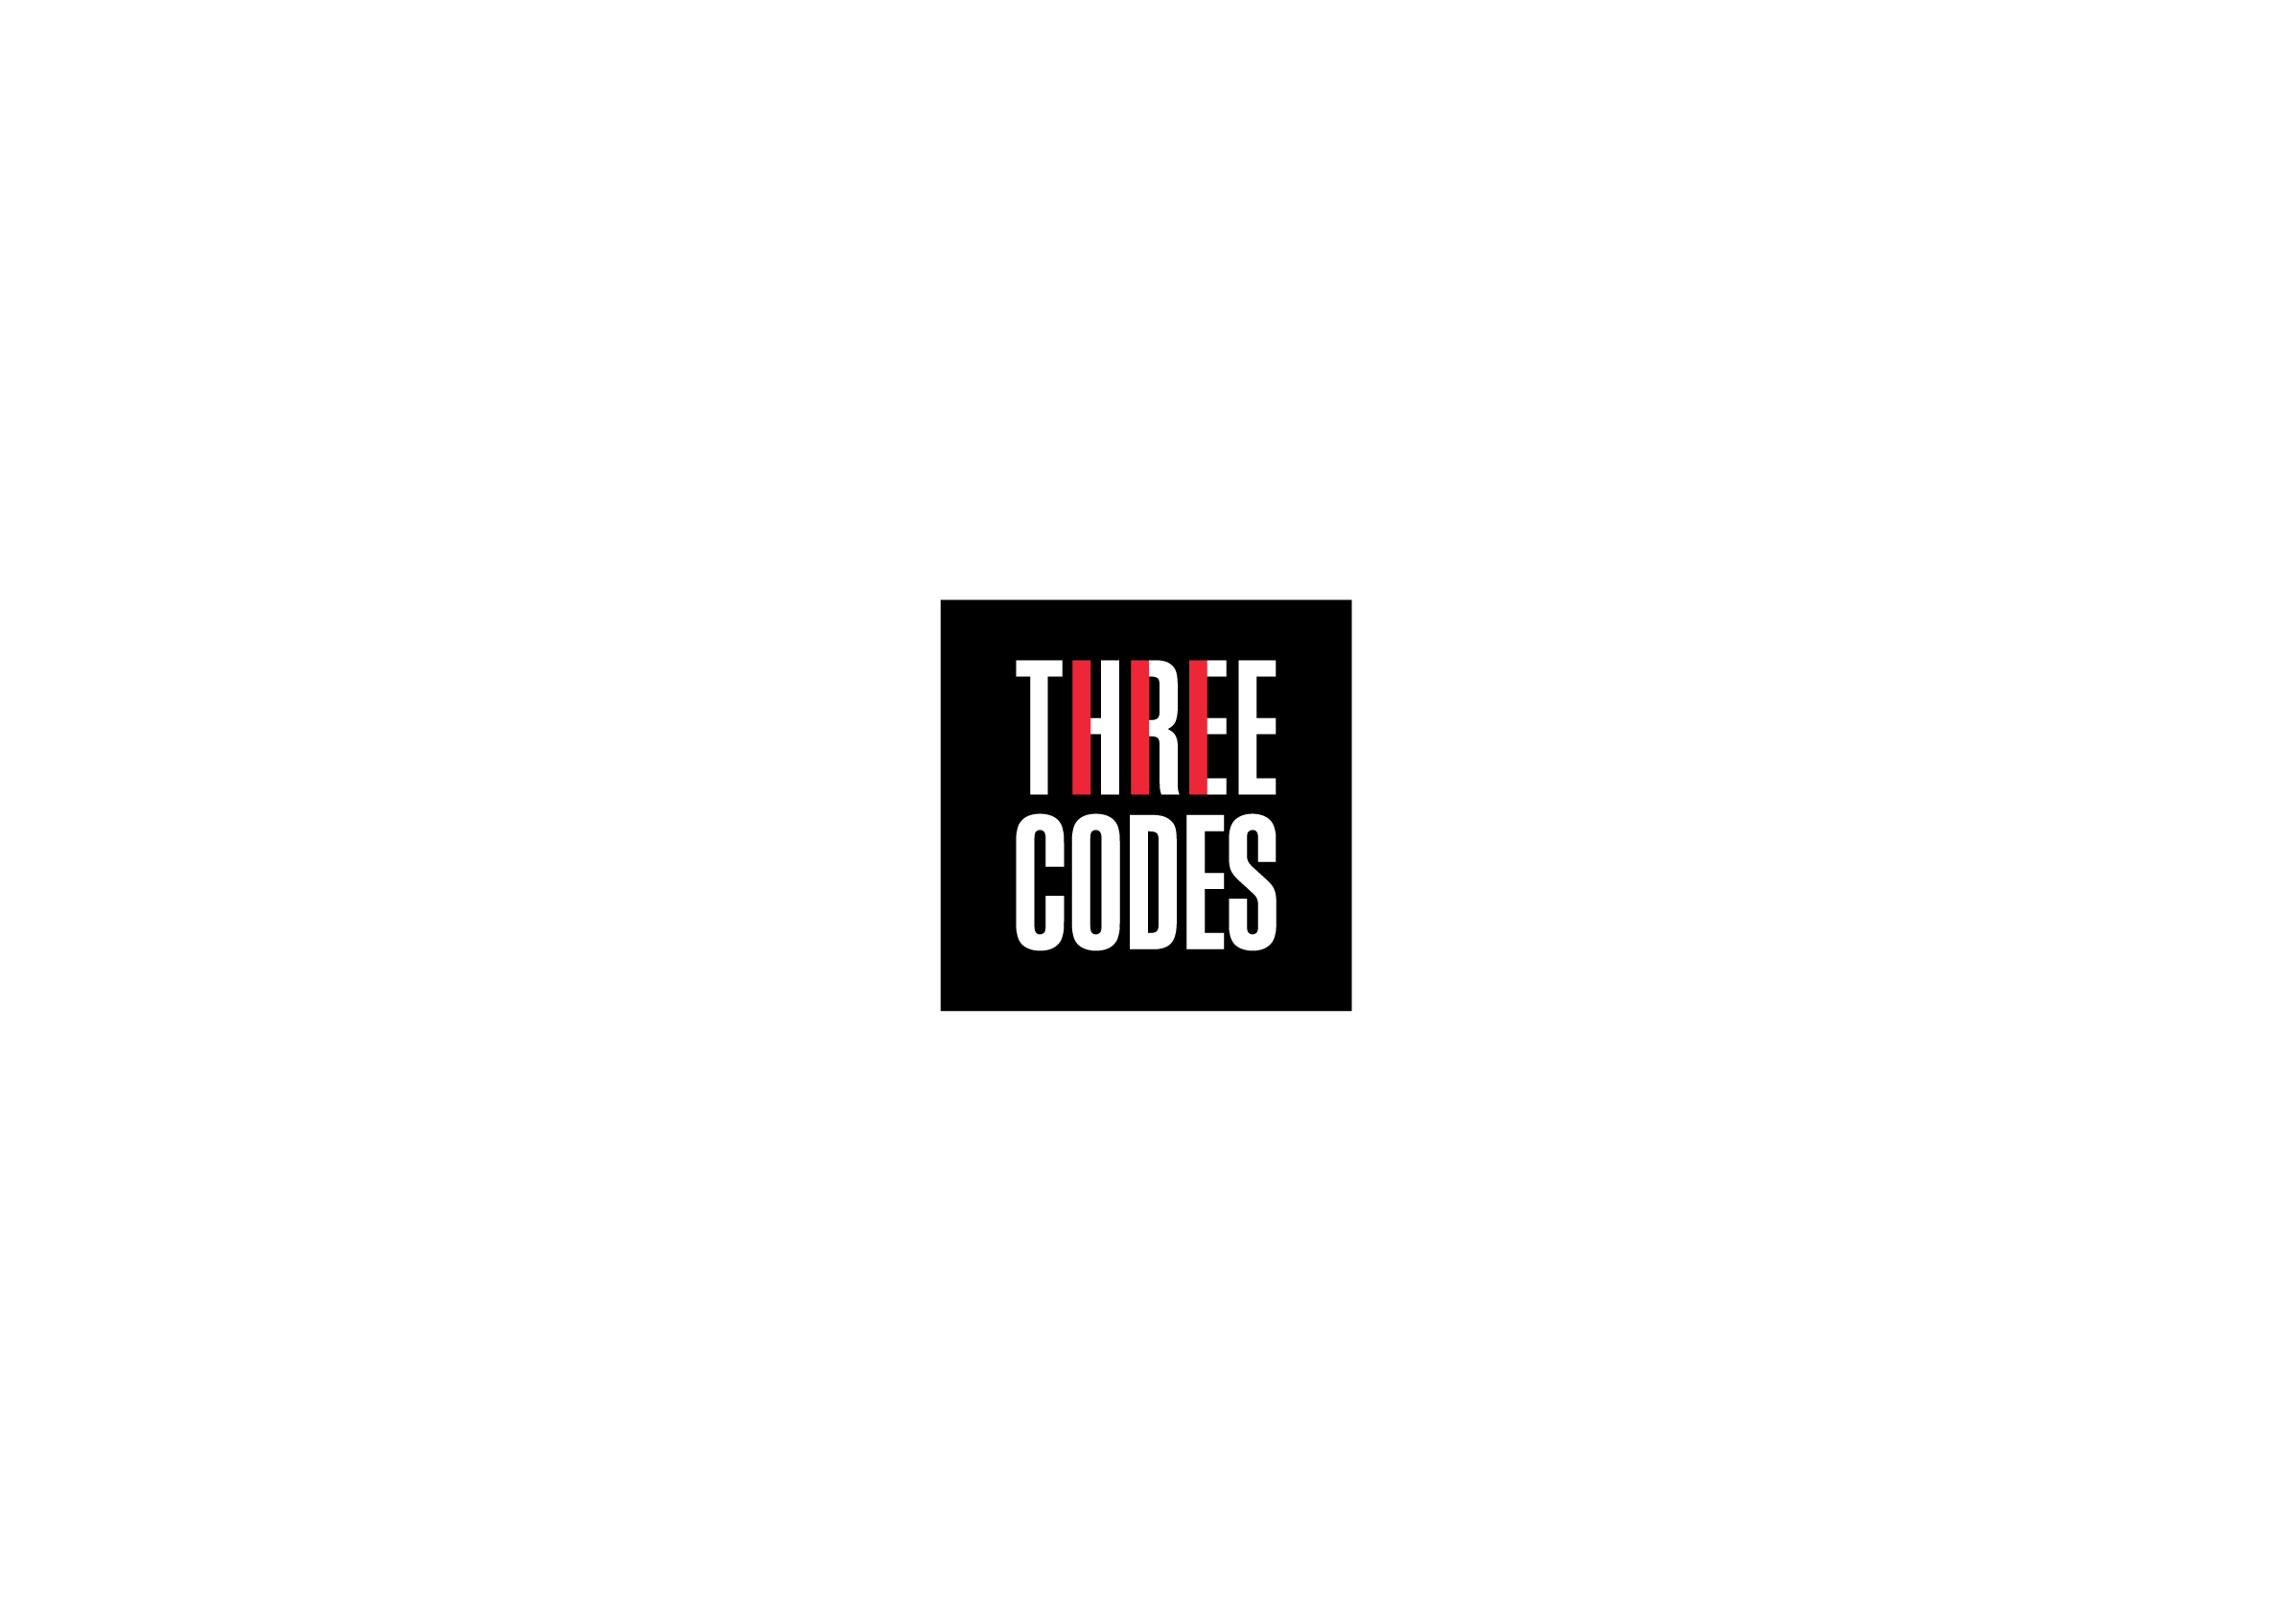 Logo for Three Codes, an electrical company by Ottawa Graphic Designer idApostle